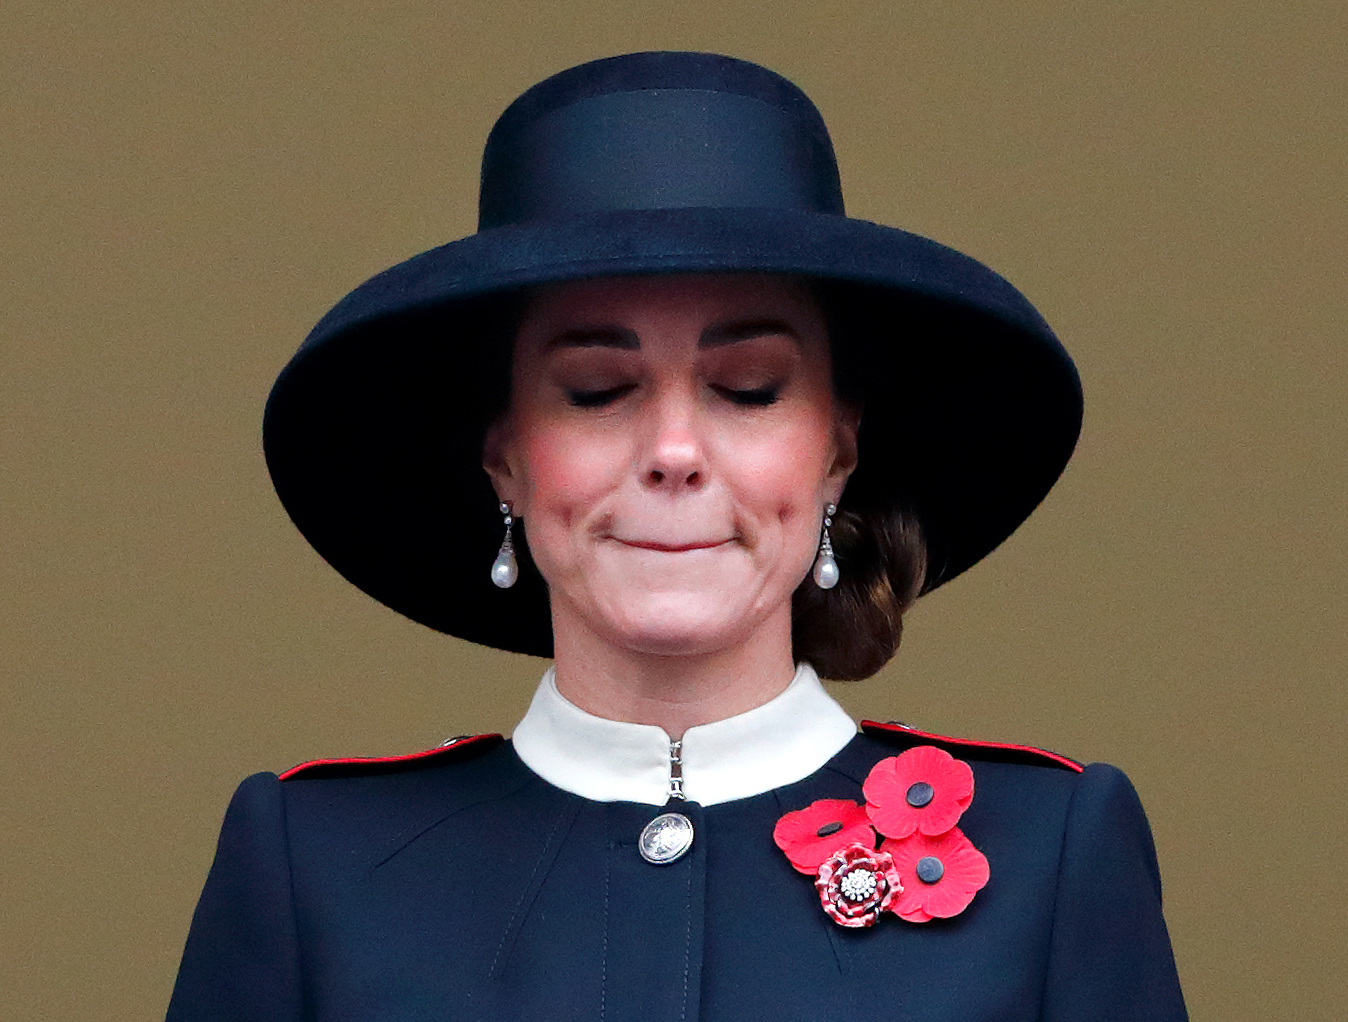 Catherine, Duchess of Cambridge at the annual Remembrance Sunday service at The Cenotaph on November 14, 2021 in London, England | Source: Getty Images